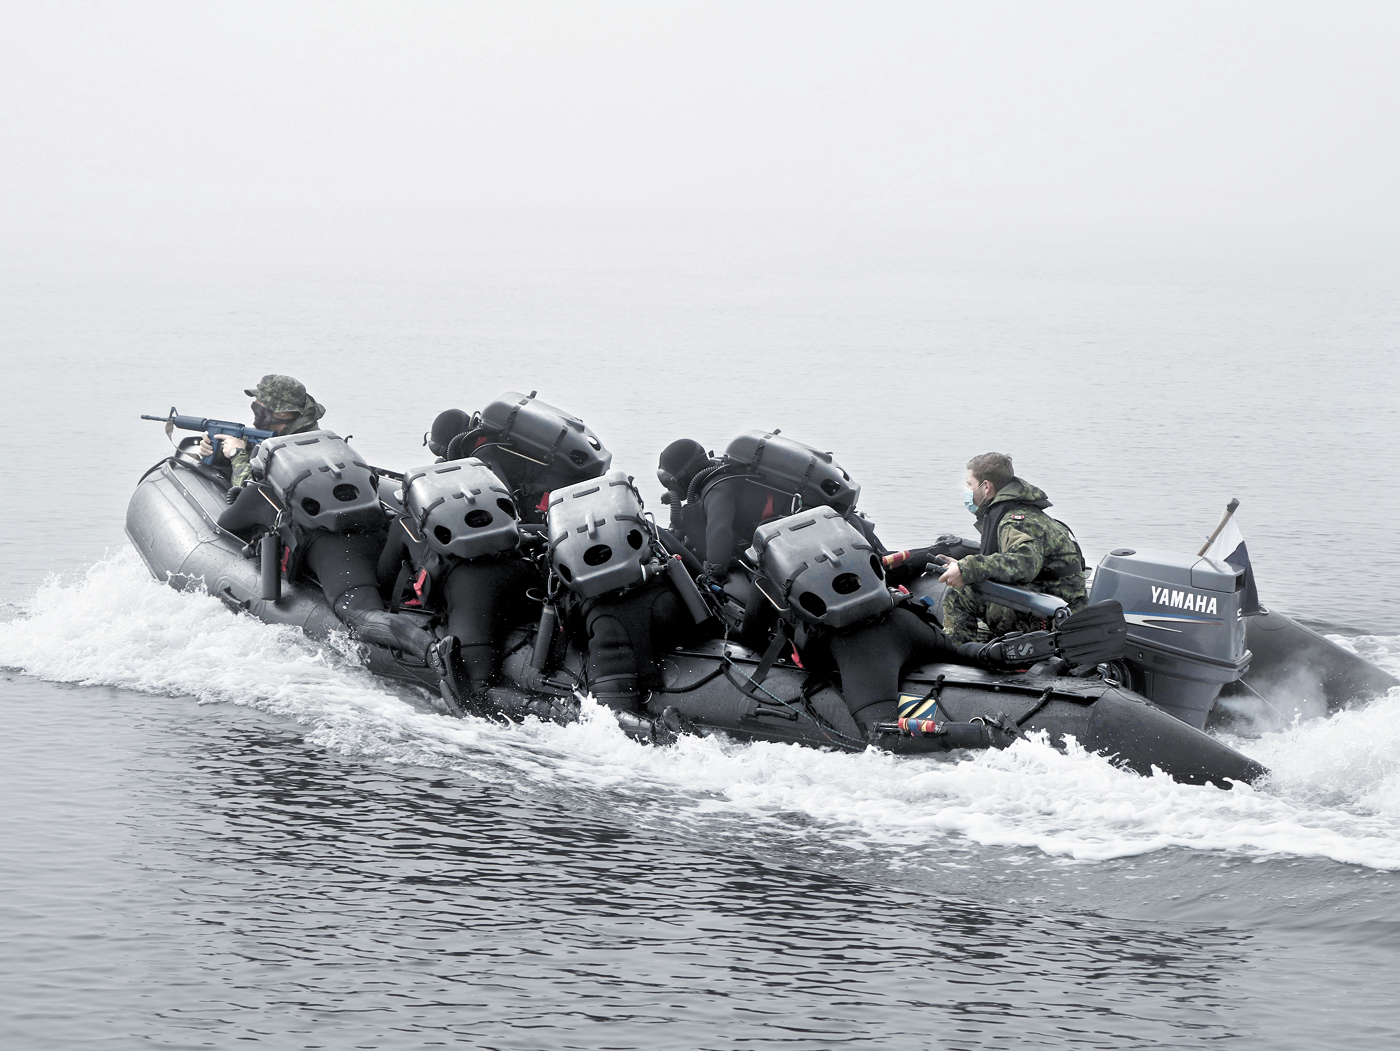 Clearance Divers in-training  practice covert insertion into an enemy held beachfront to search for sea mines.